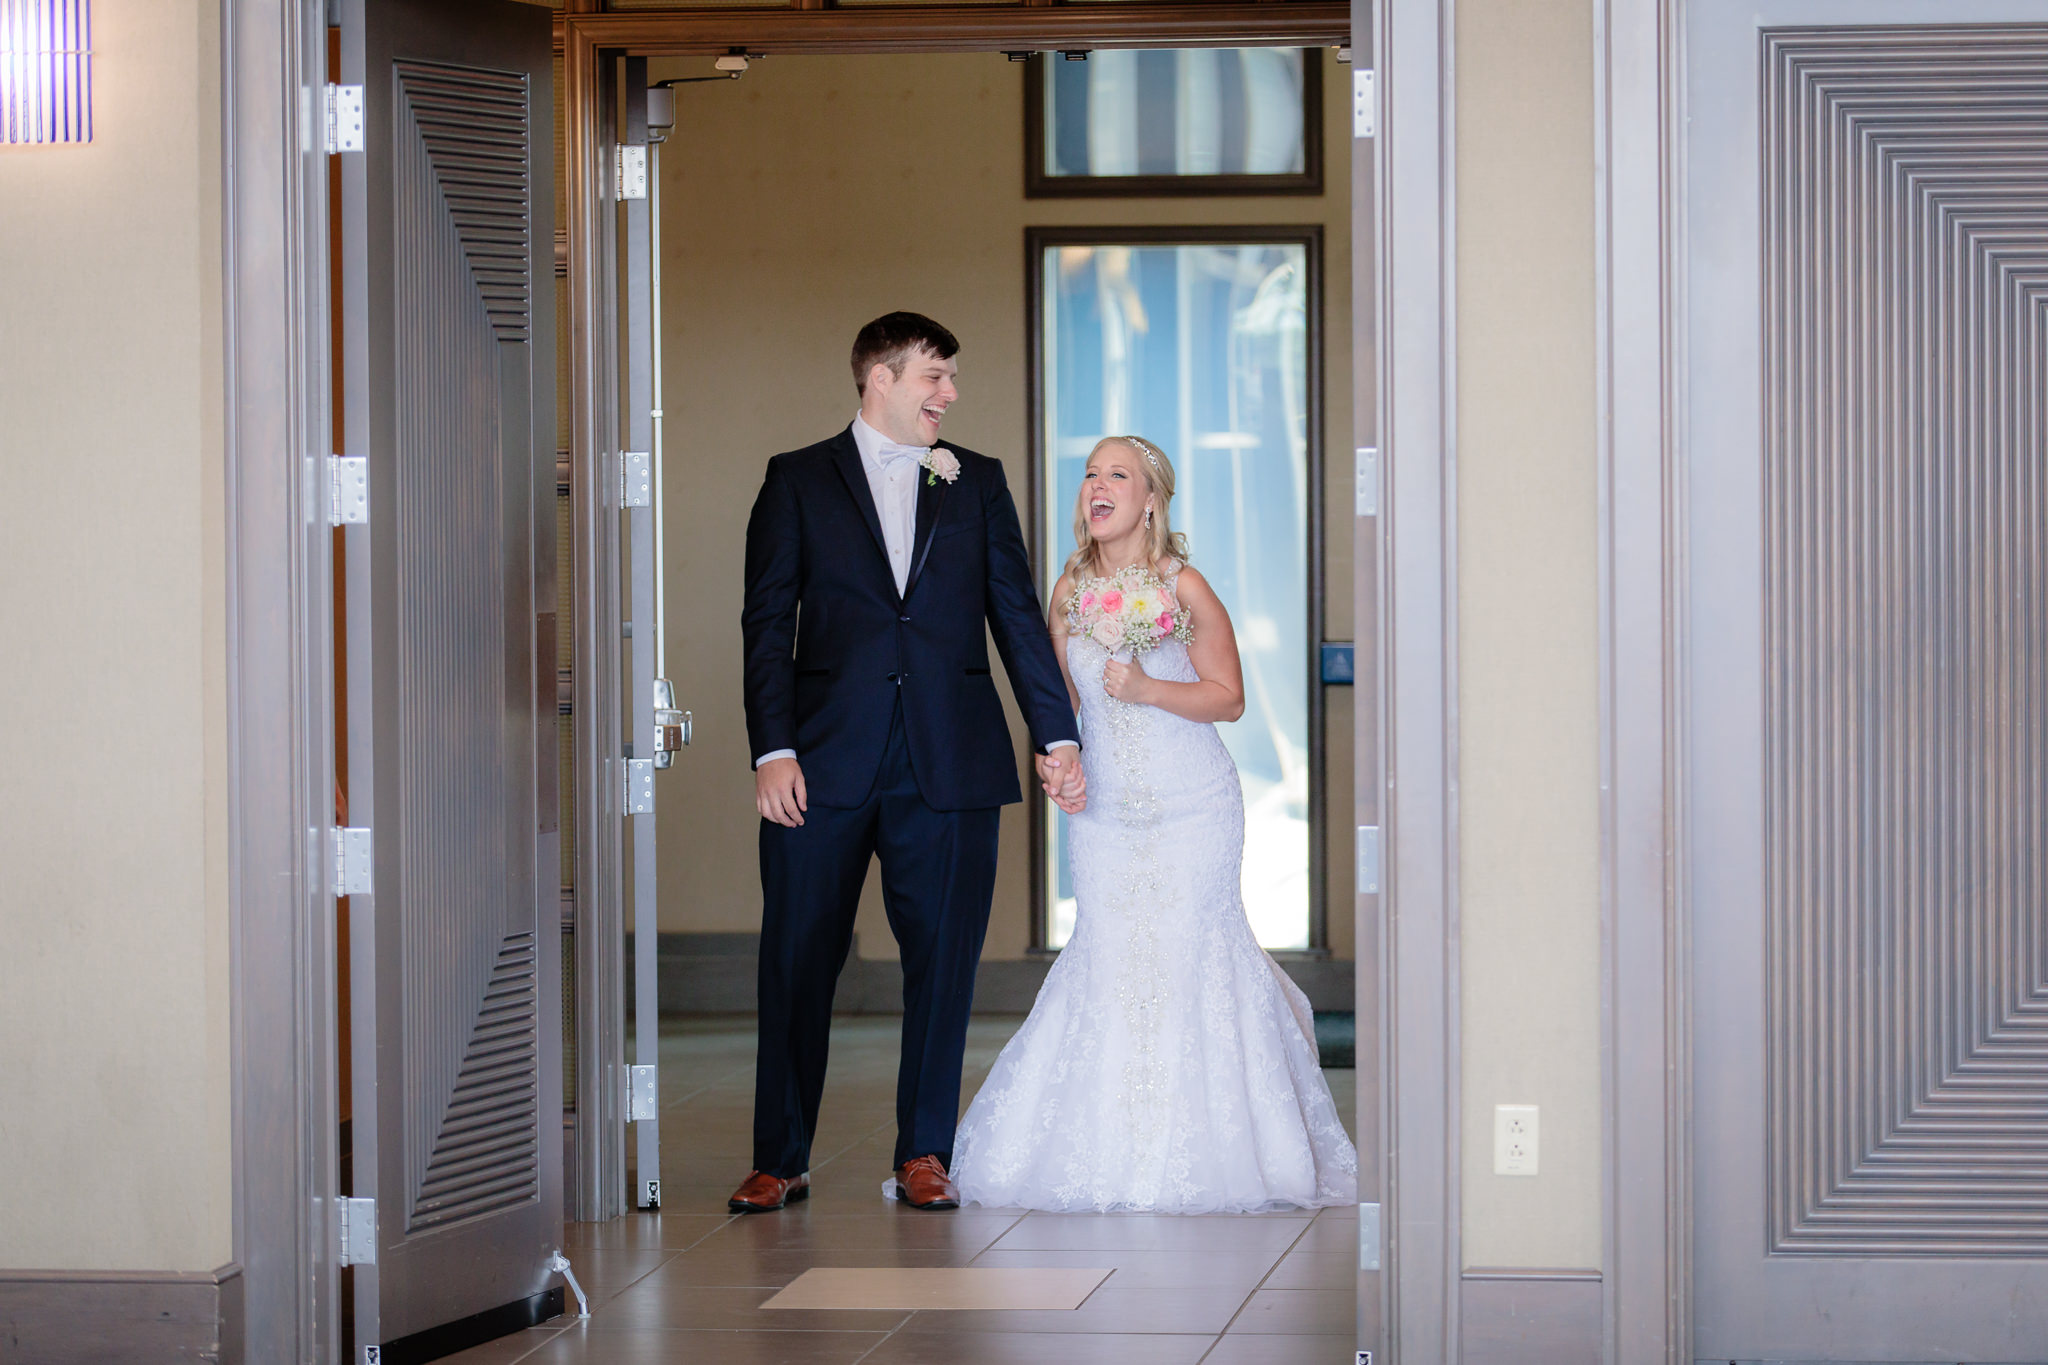 Bride & groom laugh before they enter their reception at Duquesne University